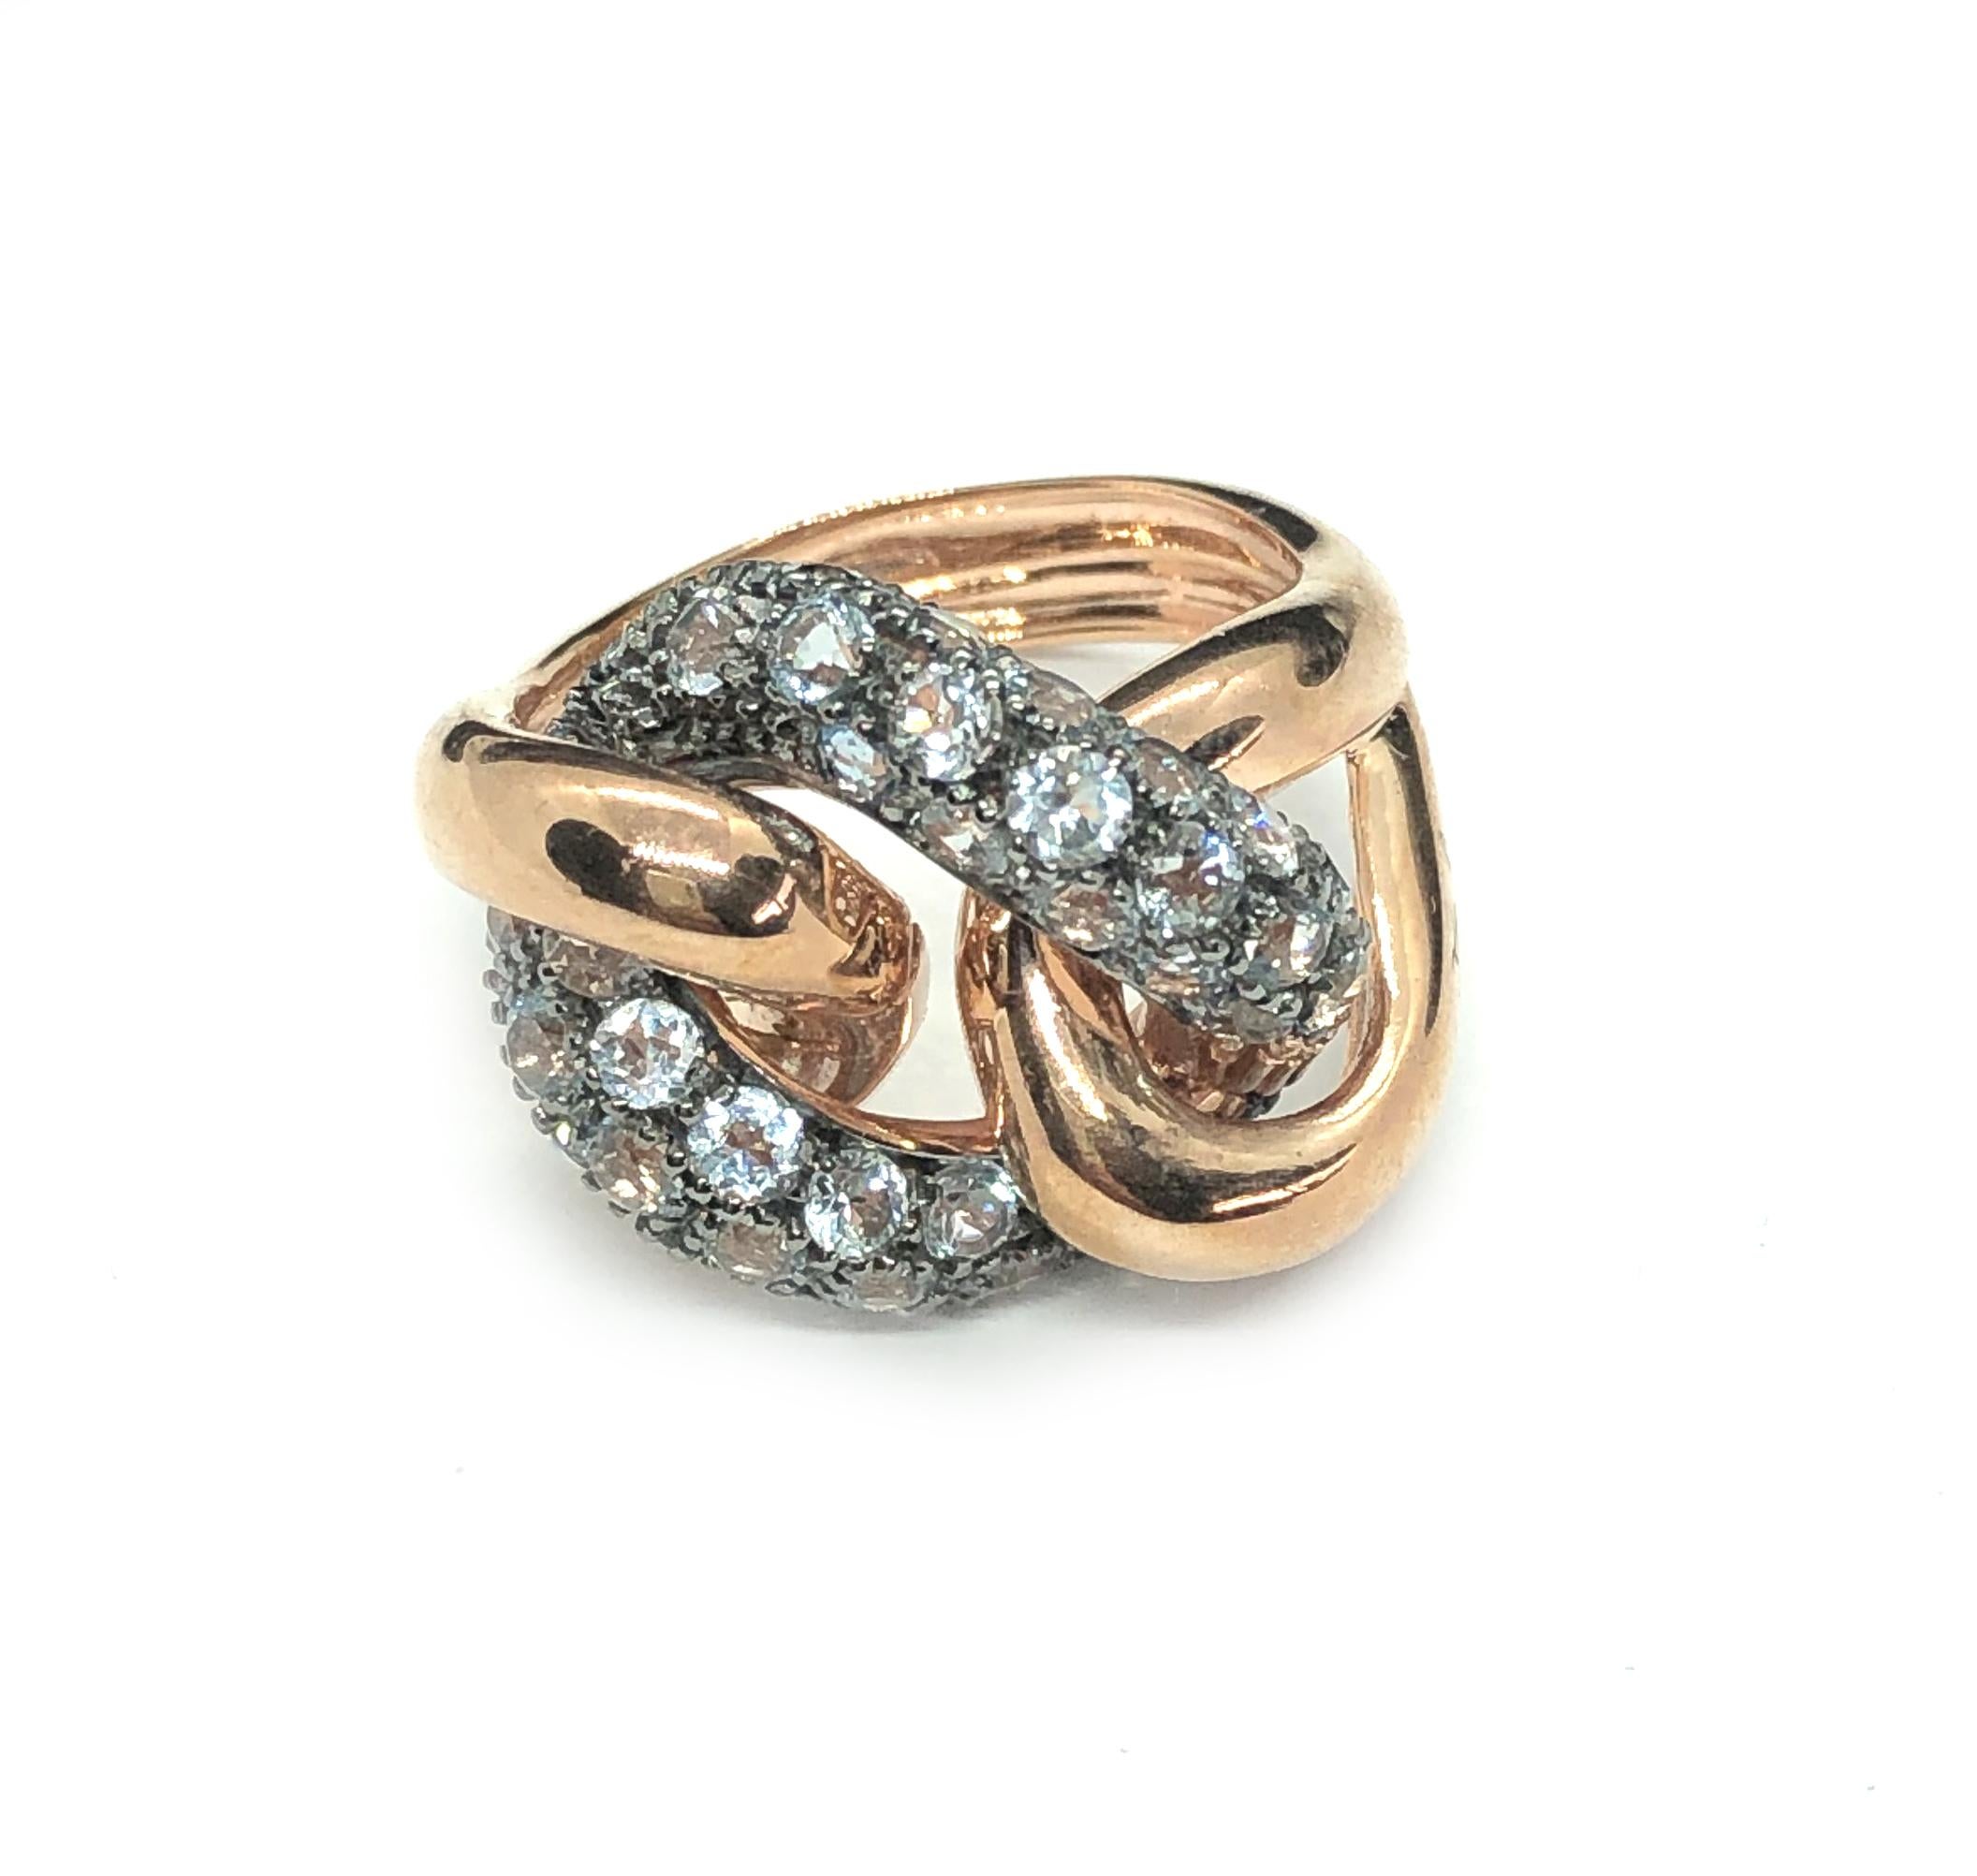 Gorgeous Groumette ring in 9 kt pink gold gr 11,80 with a 2,50 cts. pavé of brilliant cut aquamarine, signed J@Colours 